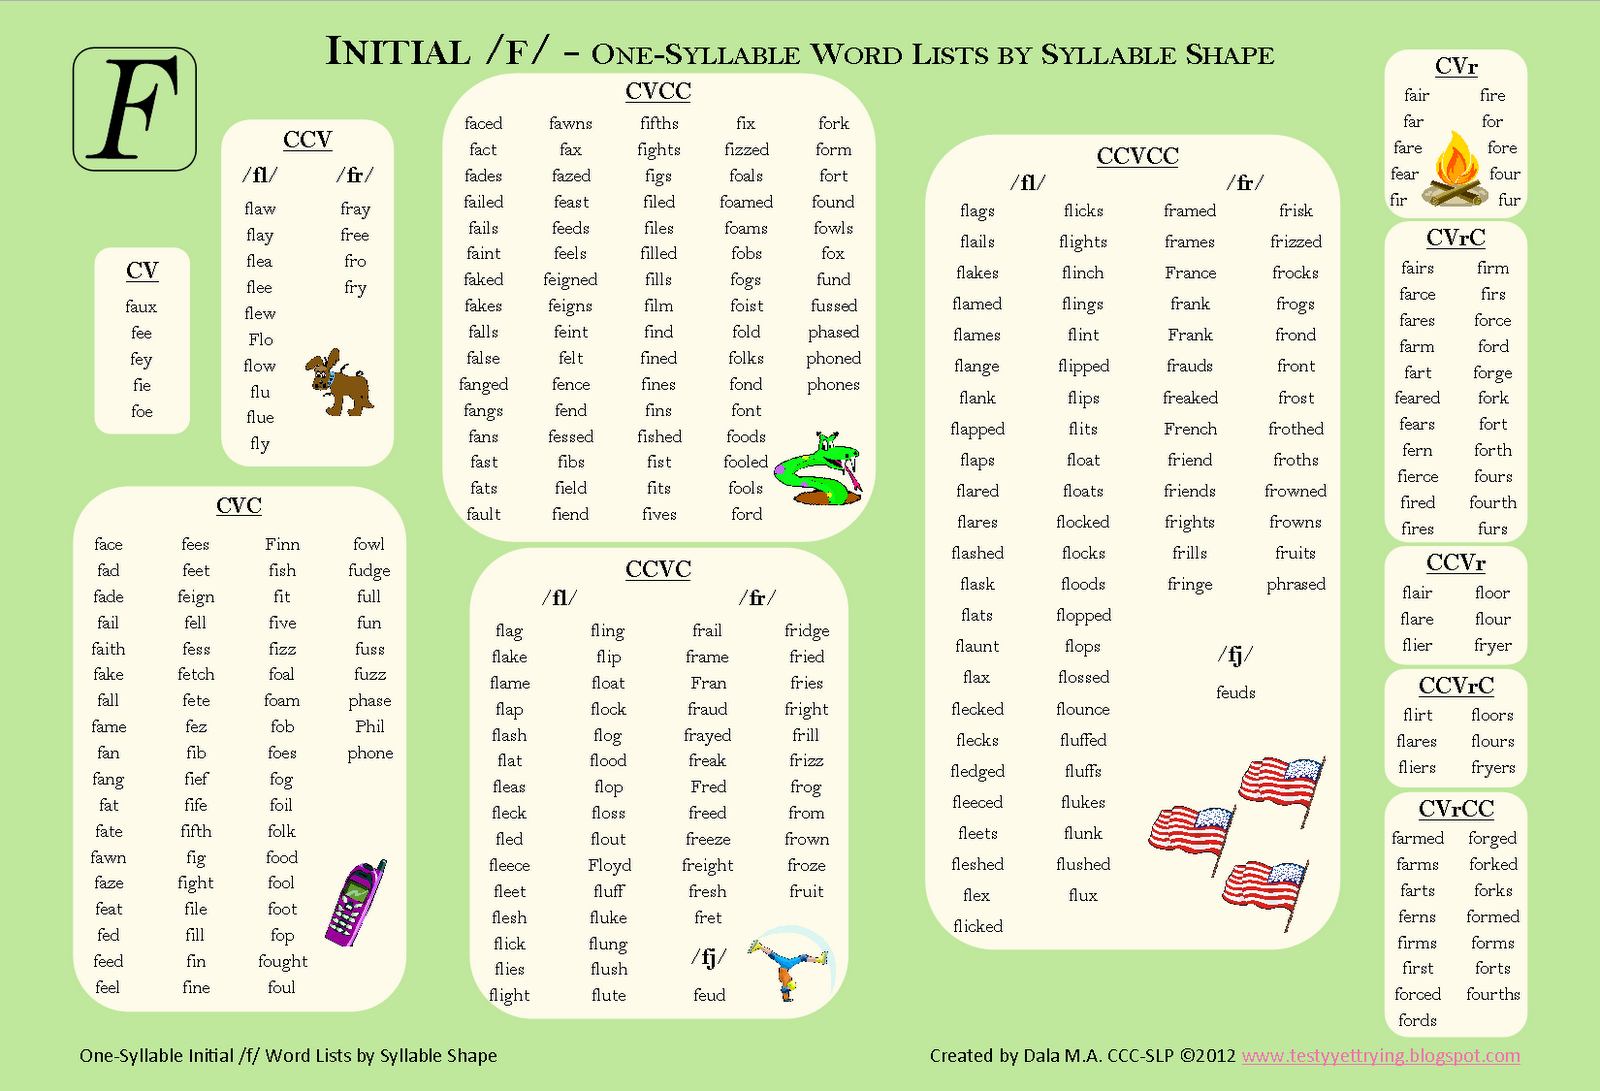 testy-yet-trying-initial-f-one-syllable-word-list-by-syllable-shape